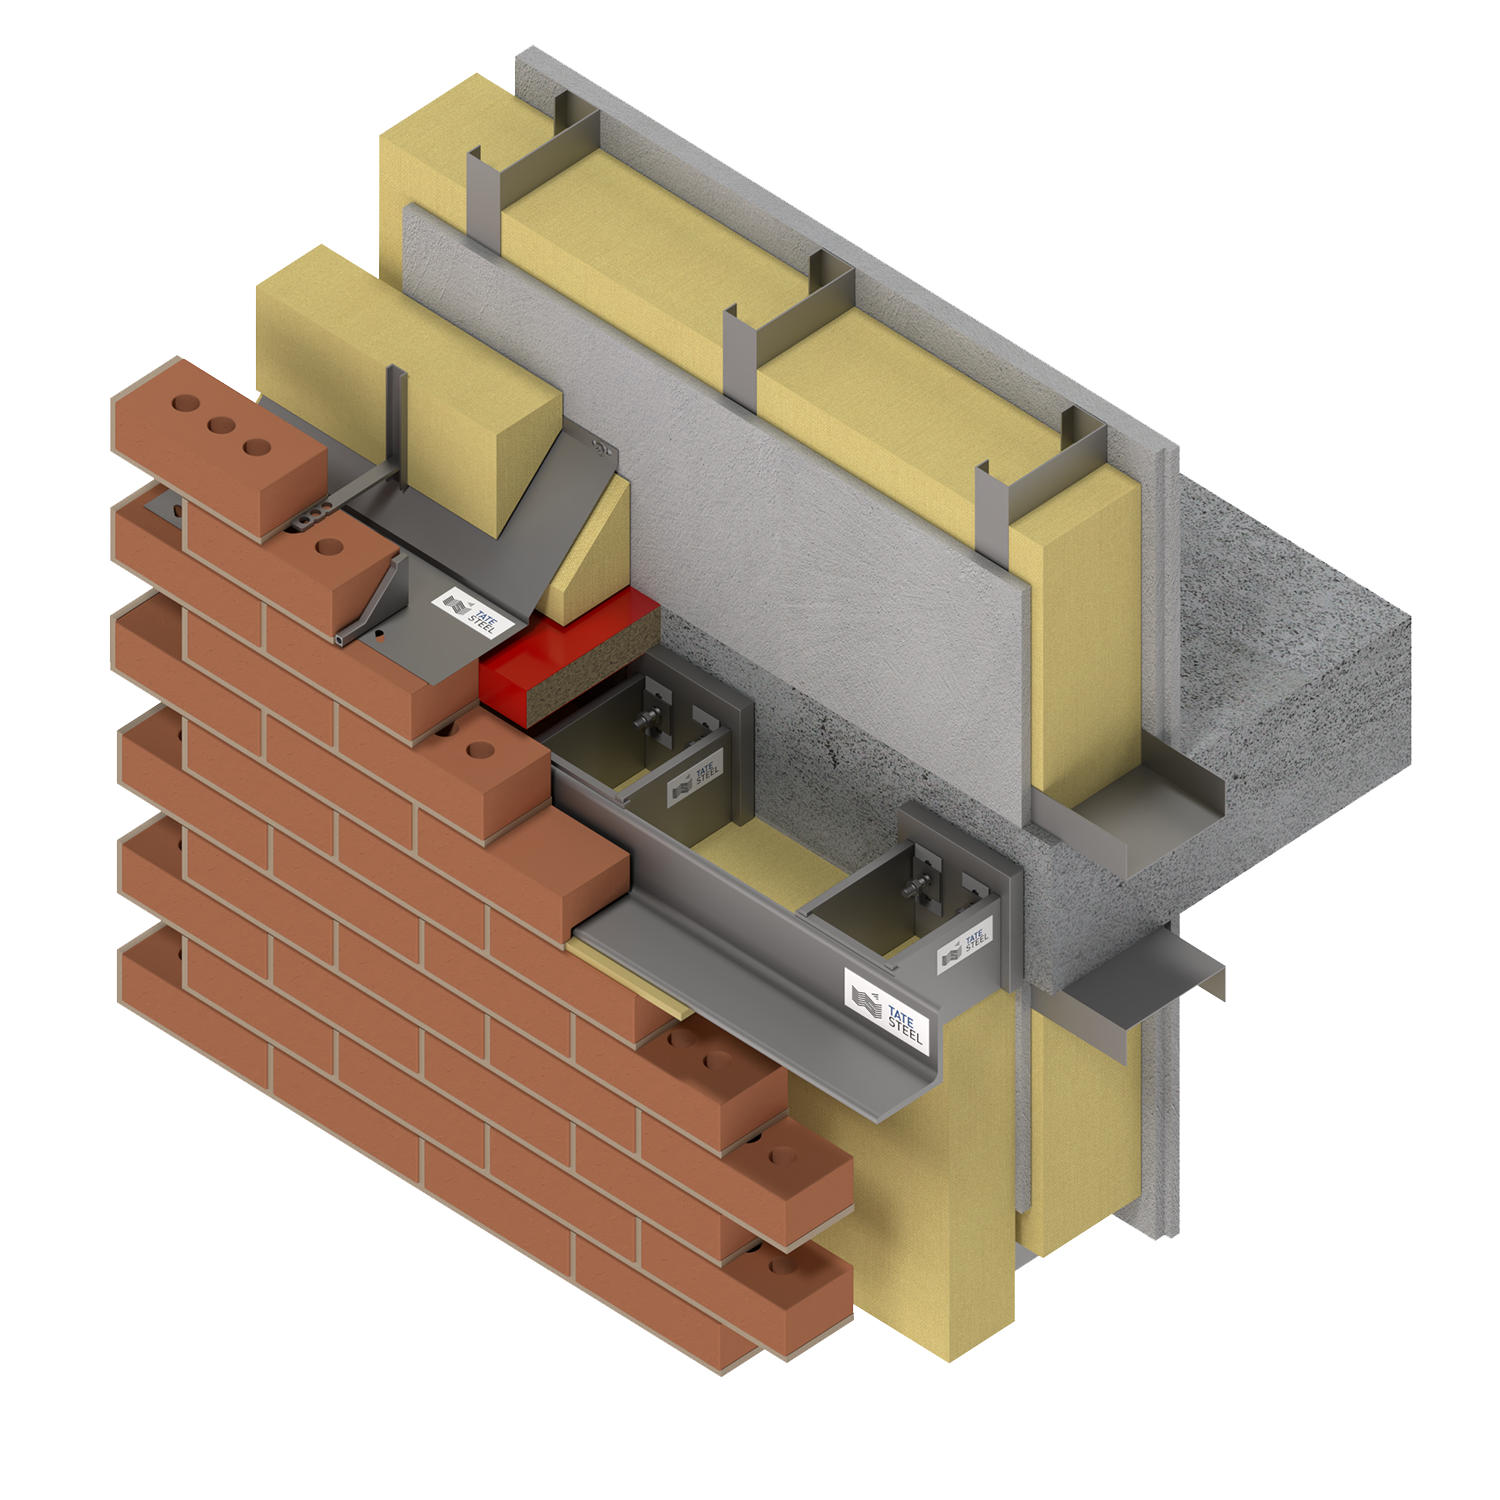 02_Masonry Support Wide Cavity Floor Level System - 3D Render_Interface.png